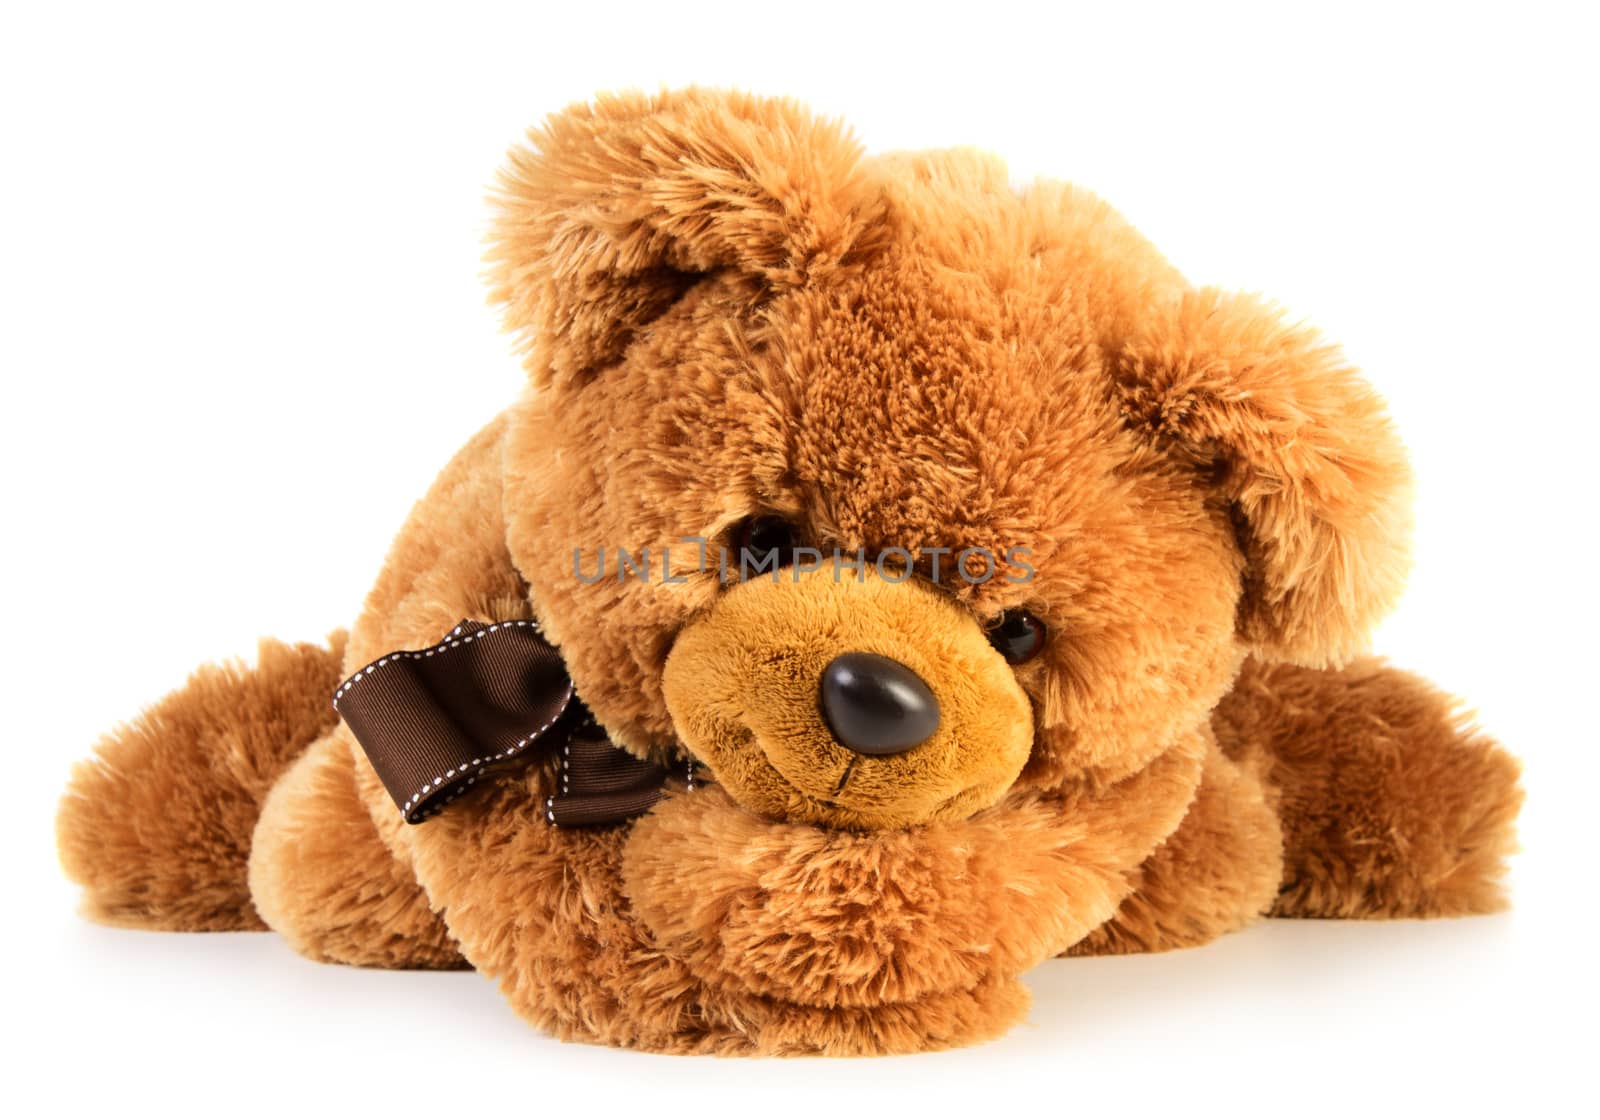 Toy teddy bear isolated on white background